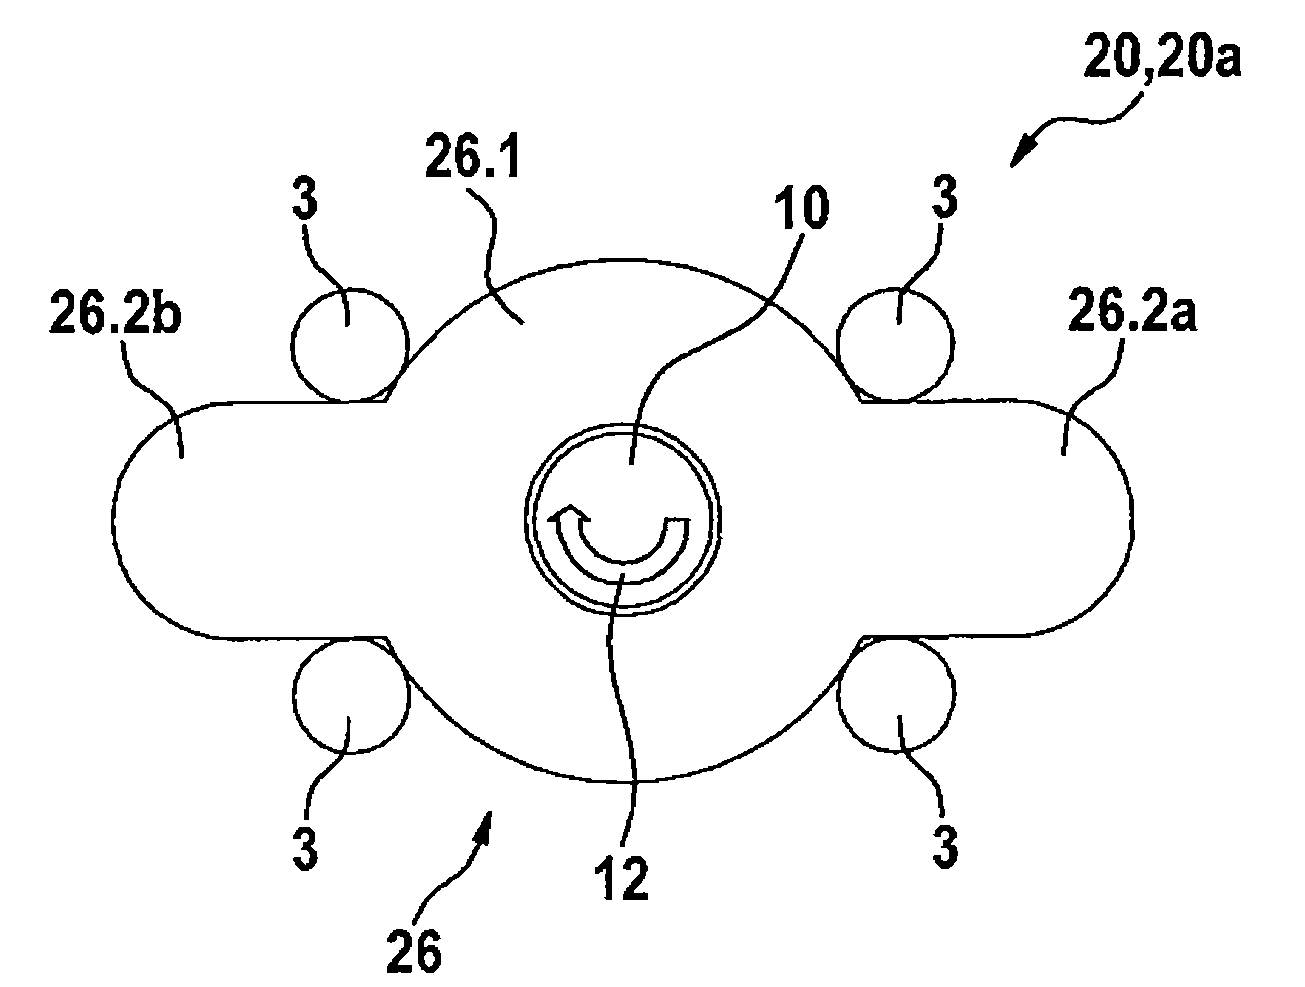 A sensor assembly used for detecting rotation angle at a rotating member in a vehicle